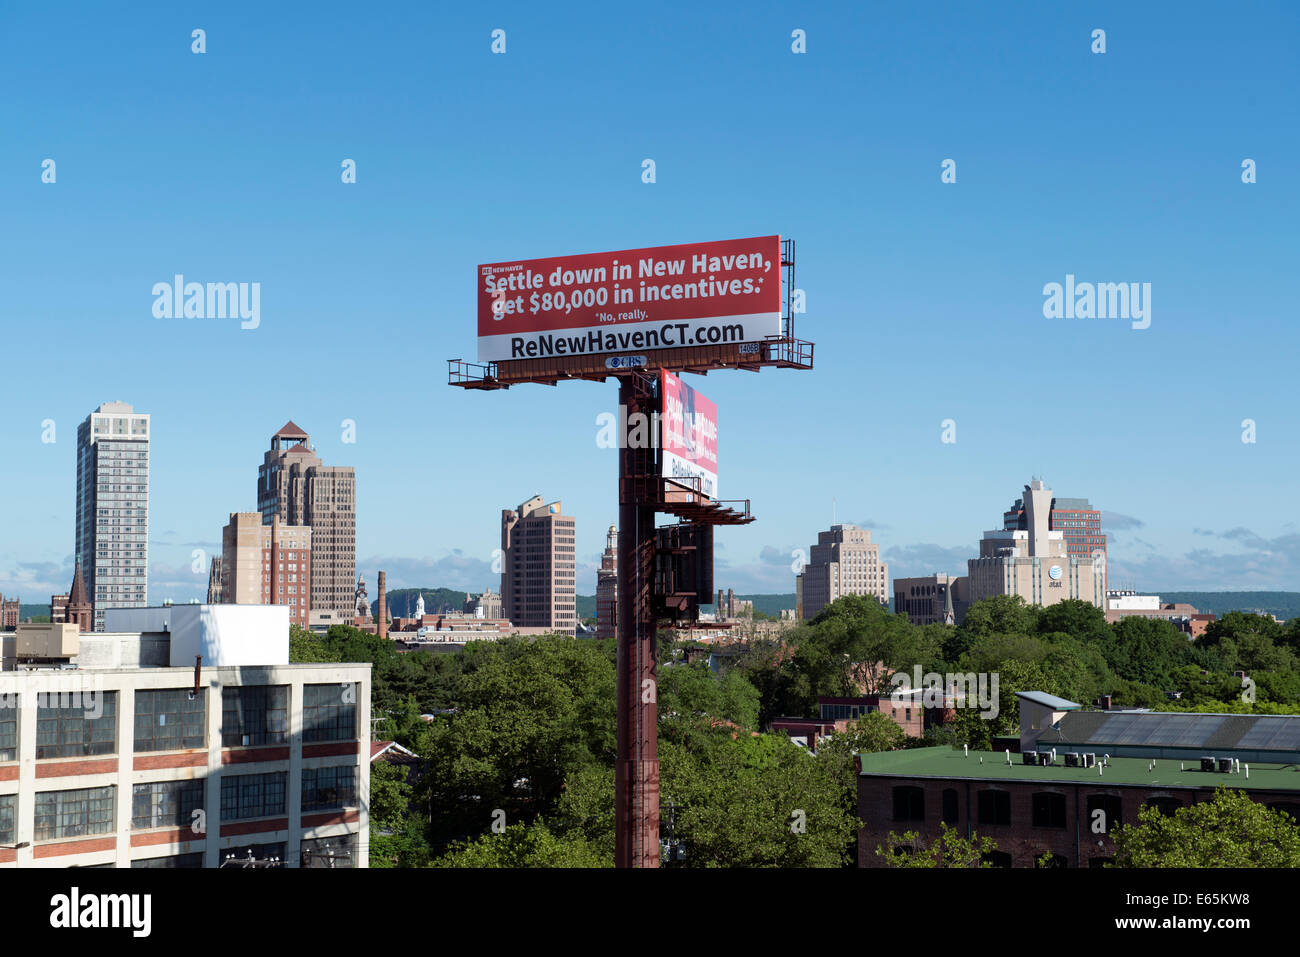 Billboard advertising New Haven's incentive program to attract new homeowners, encourage energy efficiency upgrades, and offer f Stock Photo